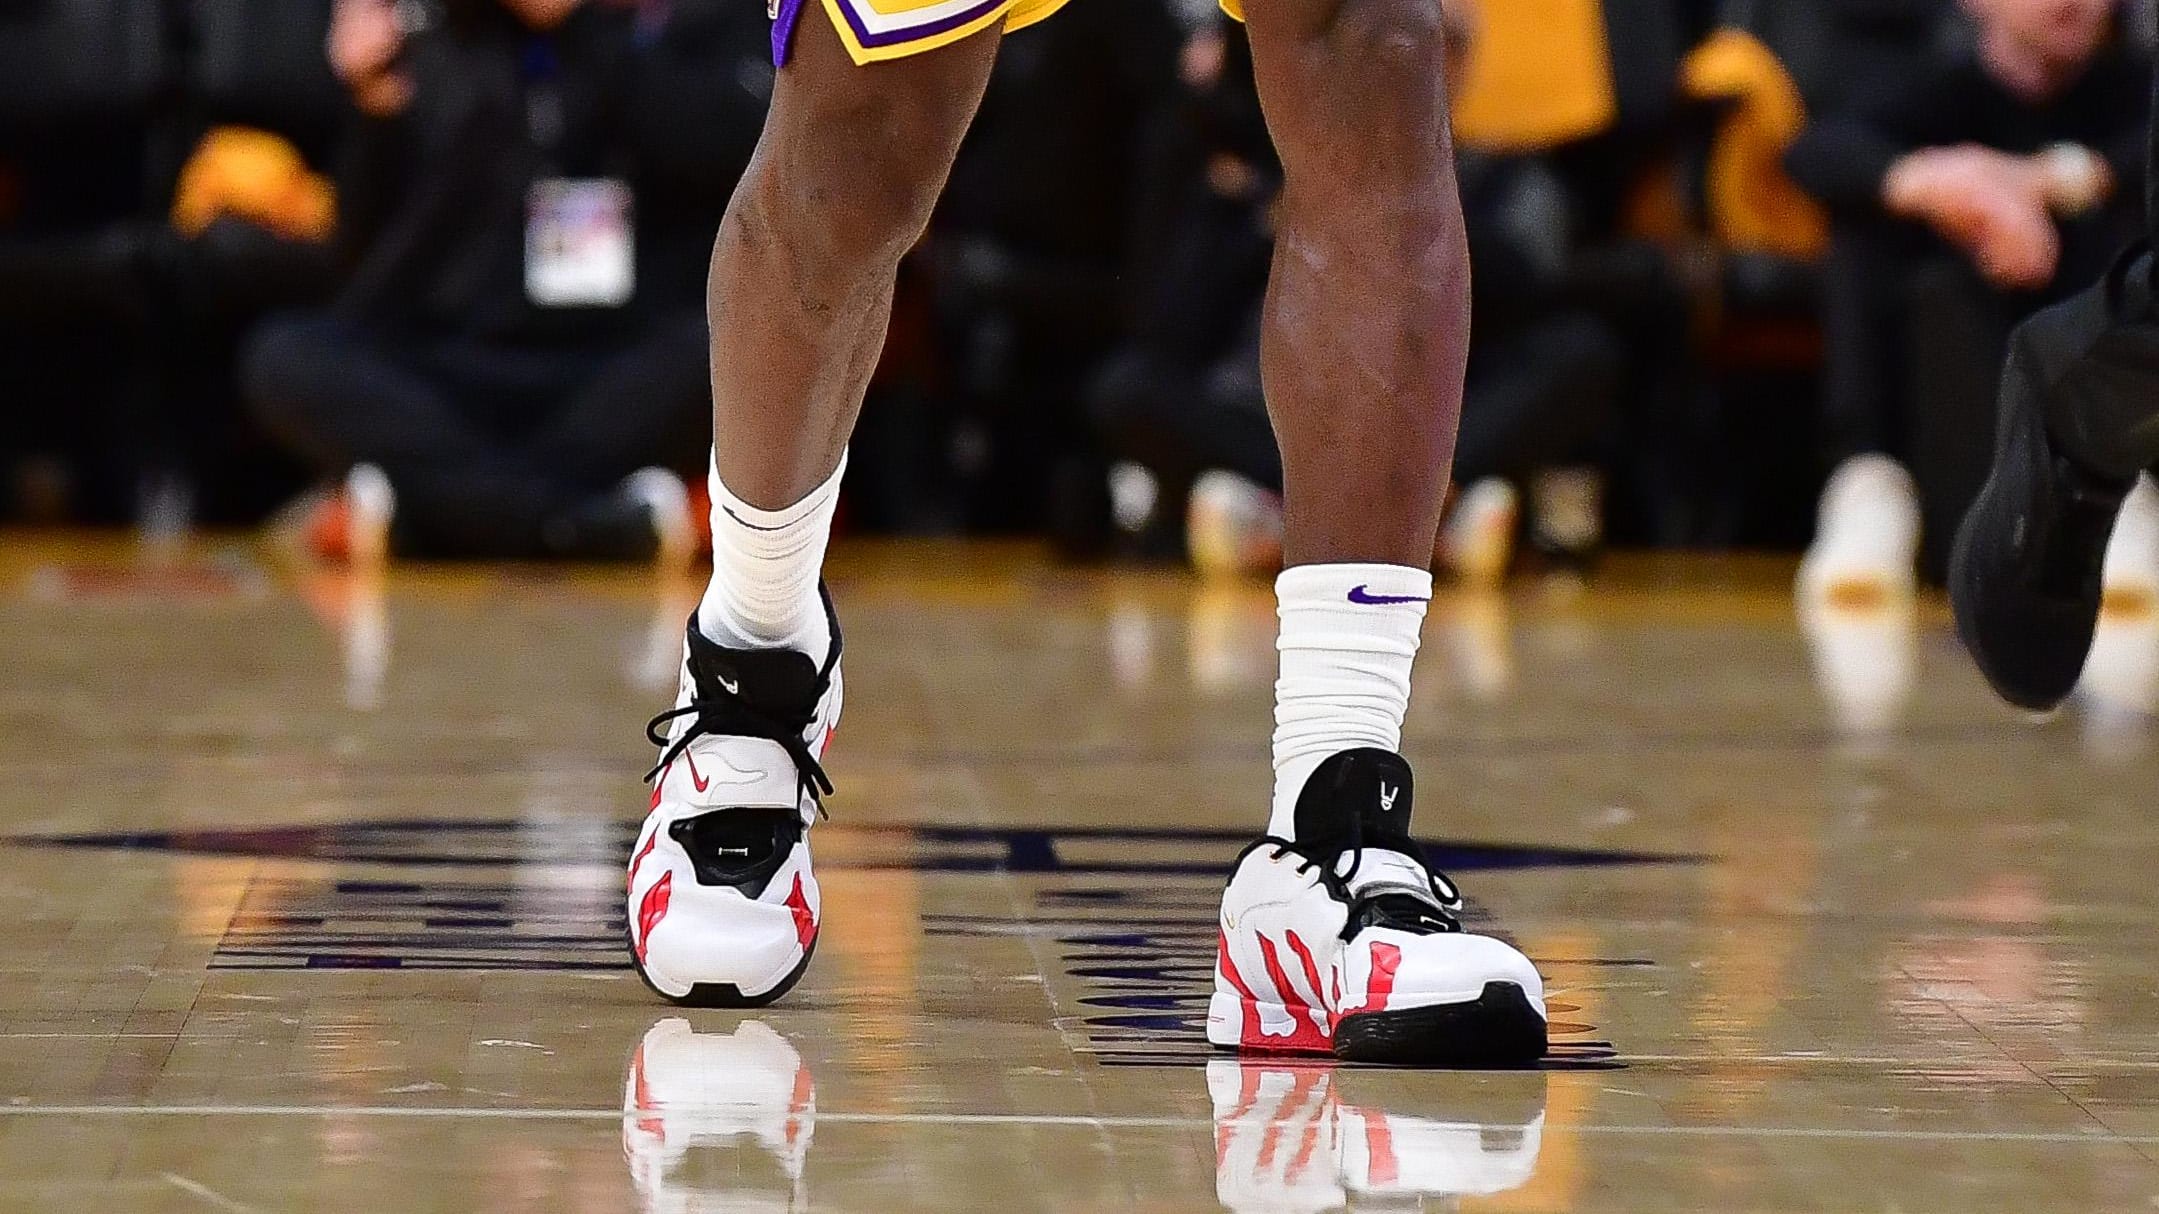  Los Angeles Lakers forward LeBron James' white and red Nike sneakers.